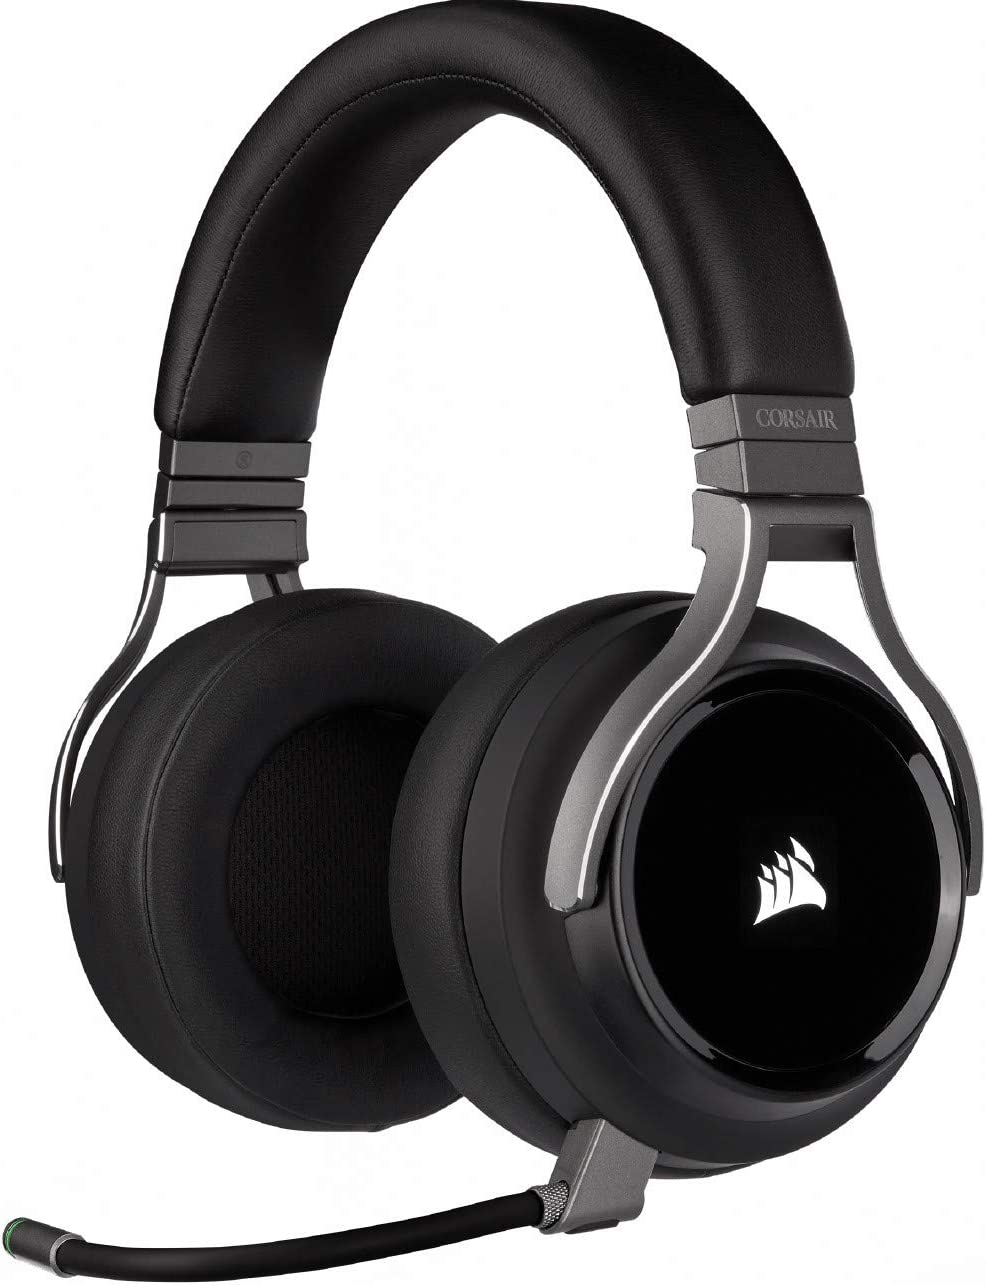 Corsair Virtuoso RGB Wireless High Fidelity Gaming Headset (7.1 Surround Sound, omnidirectional microphone with PC and PS4 compatibility) Carbon